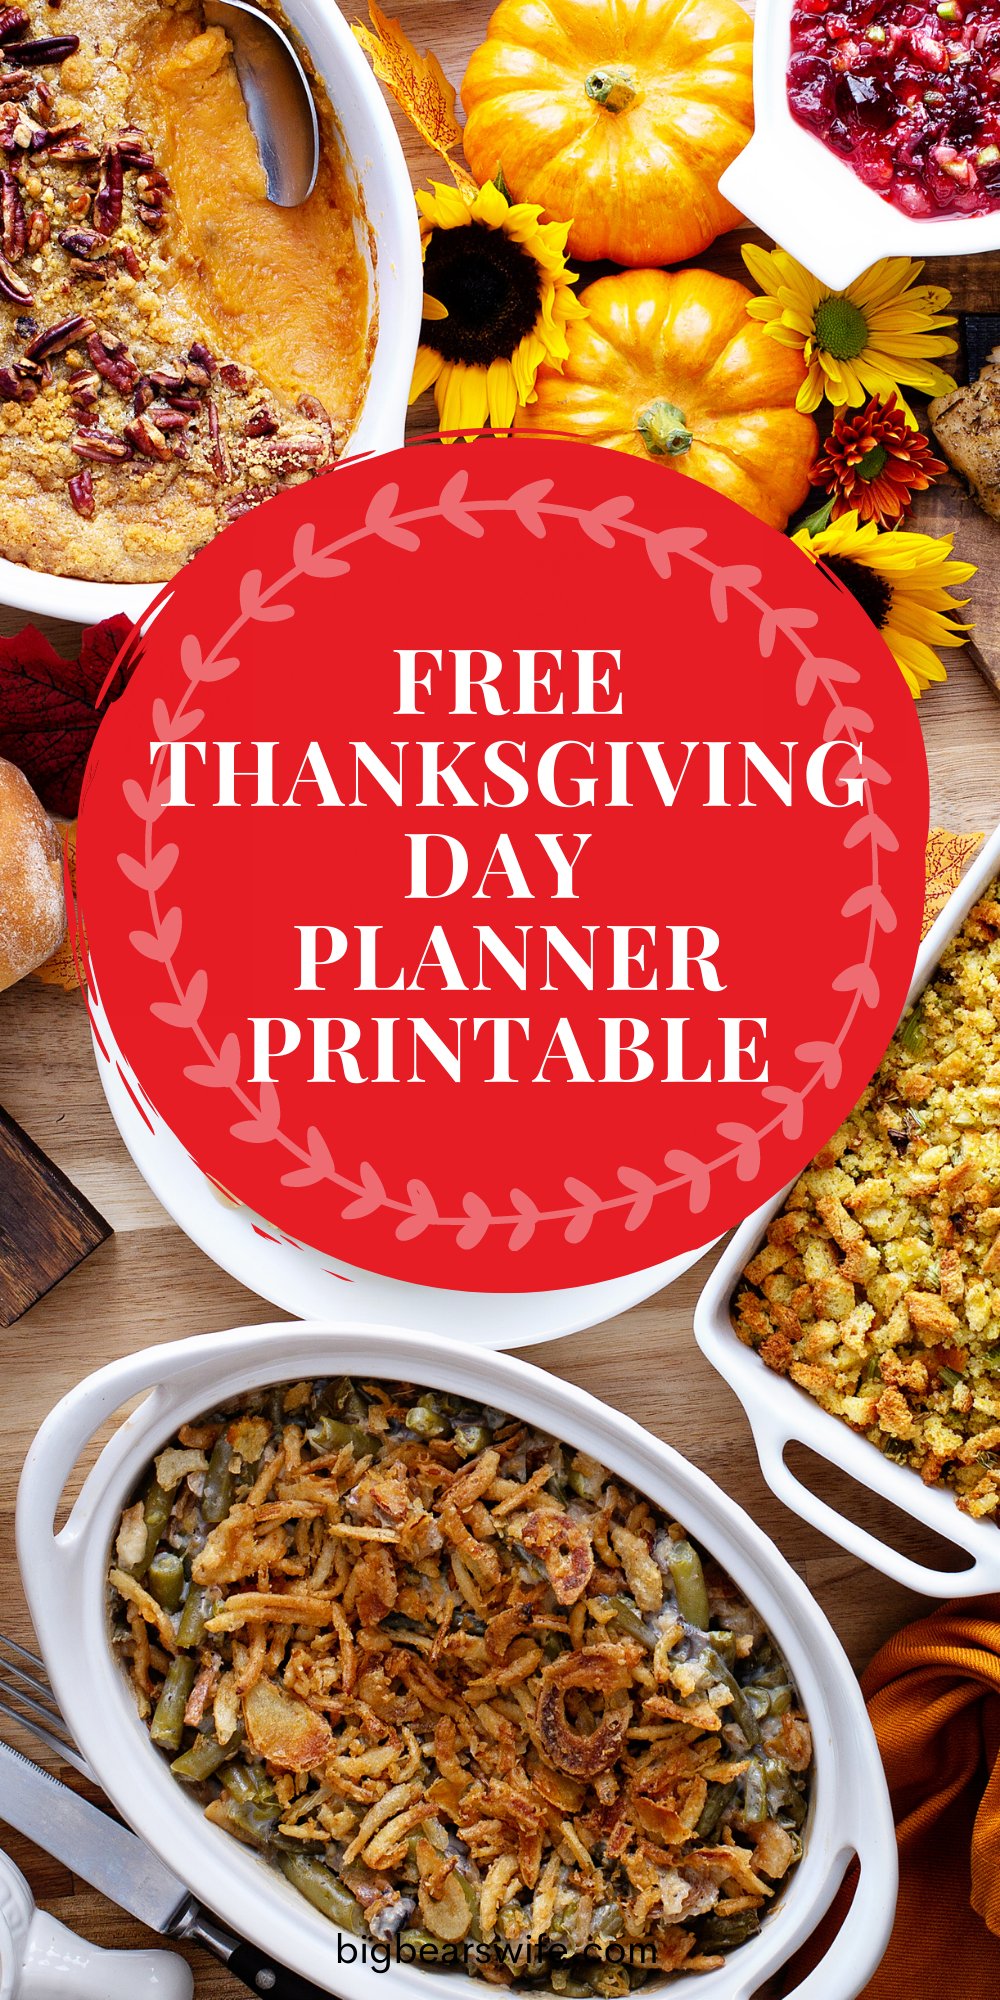 A Free Thanksgiving Day Planner Printable just for you to help make sure that you stay organized and stress free this holiday season! via @bigbearswife